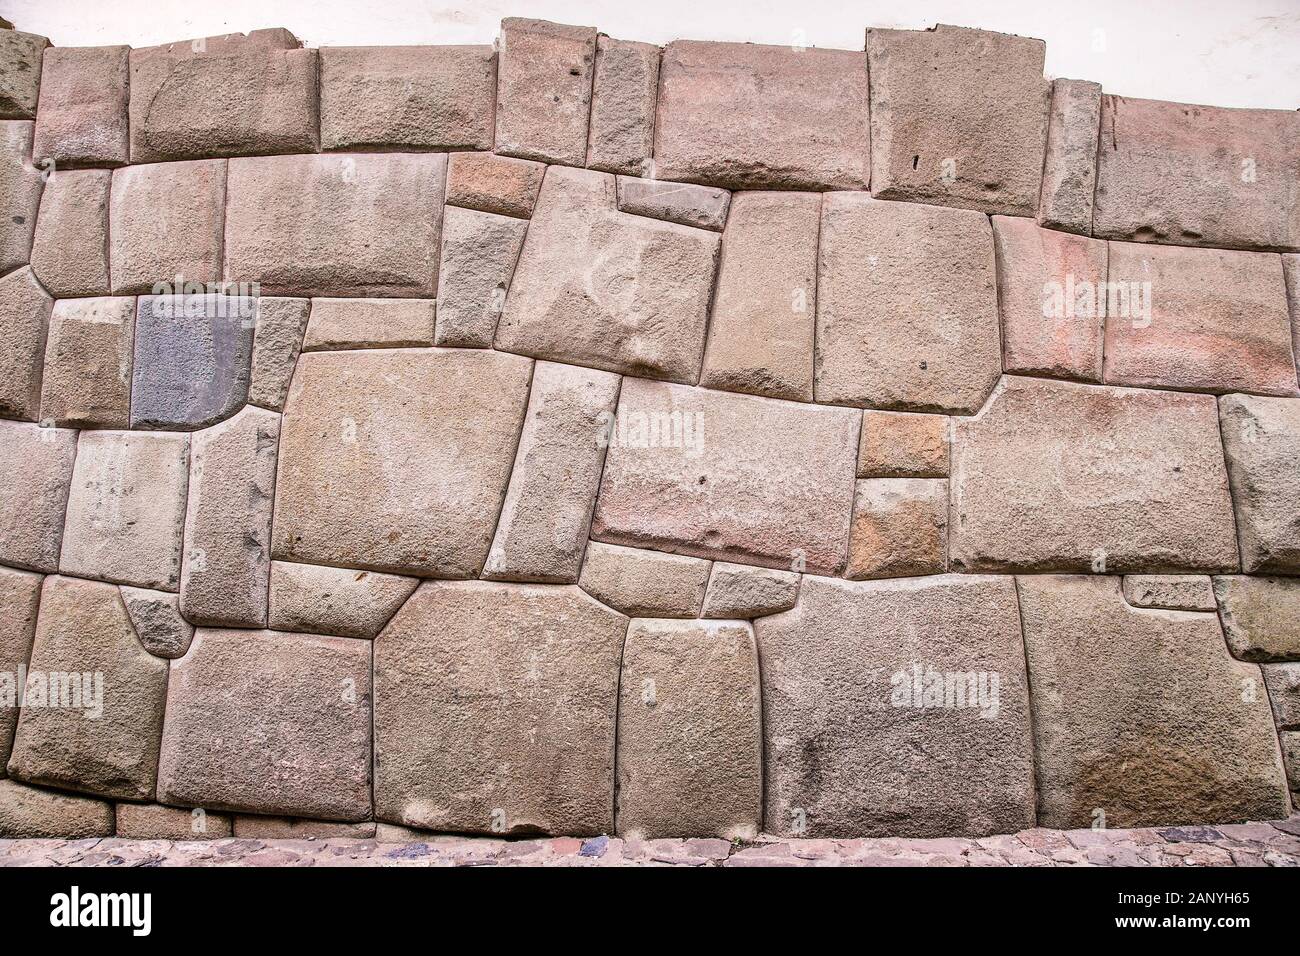 Incredible Inca Wall on Hatun Rumiyoc Street, Famous Ancient Street in Cusco, Peru, South America, Archaeological site. Stock Photo